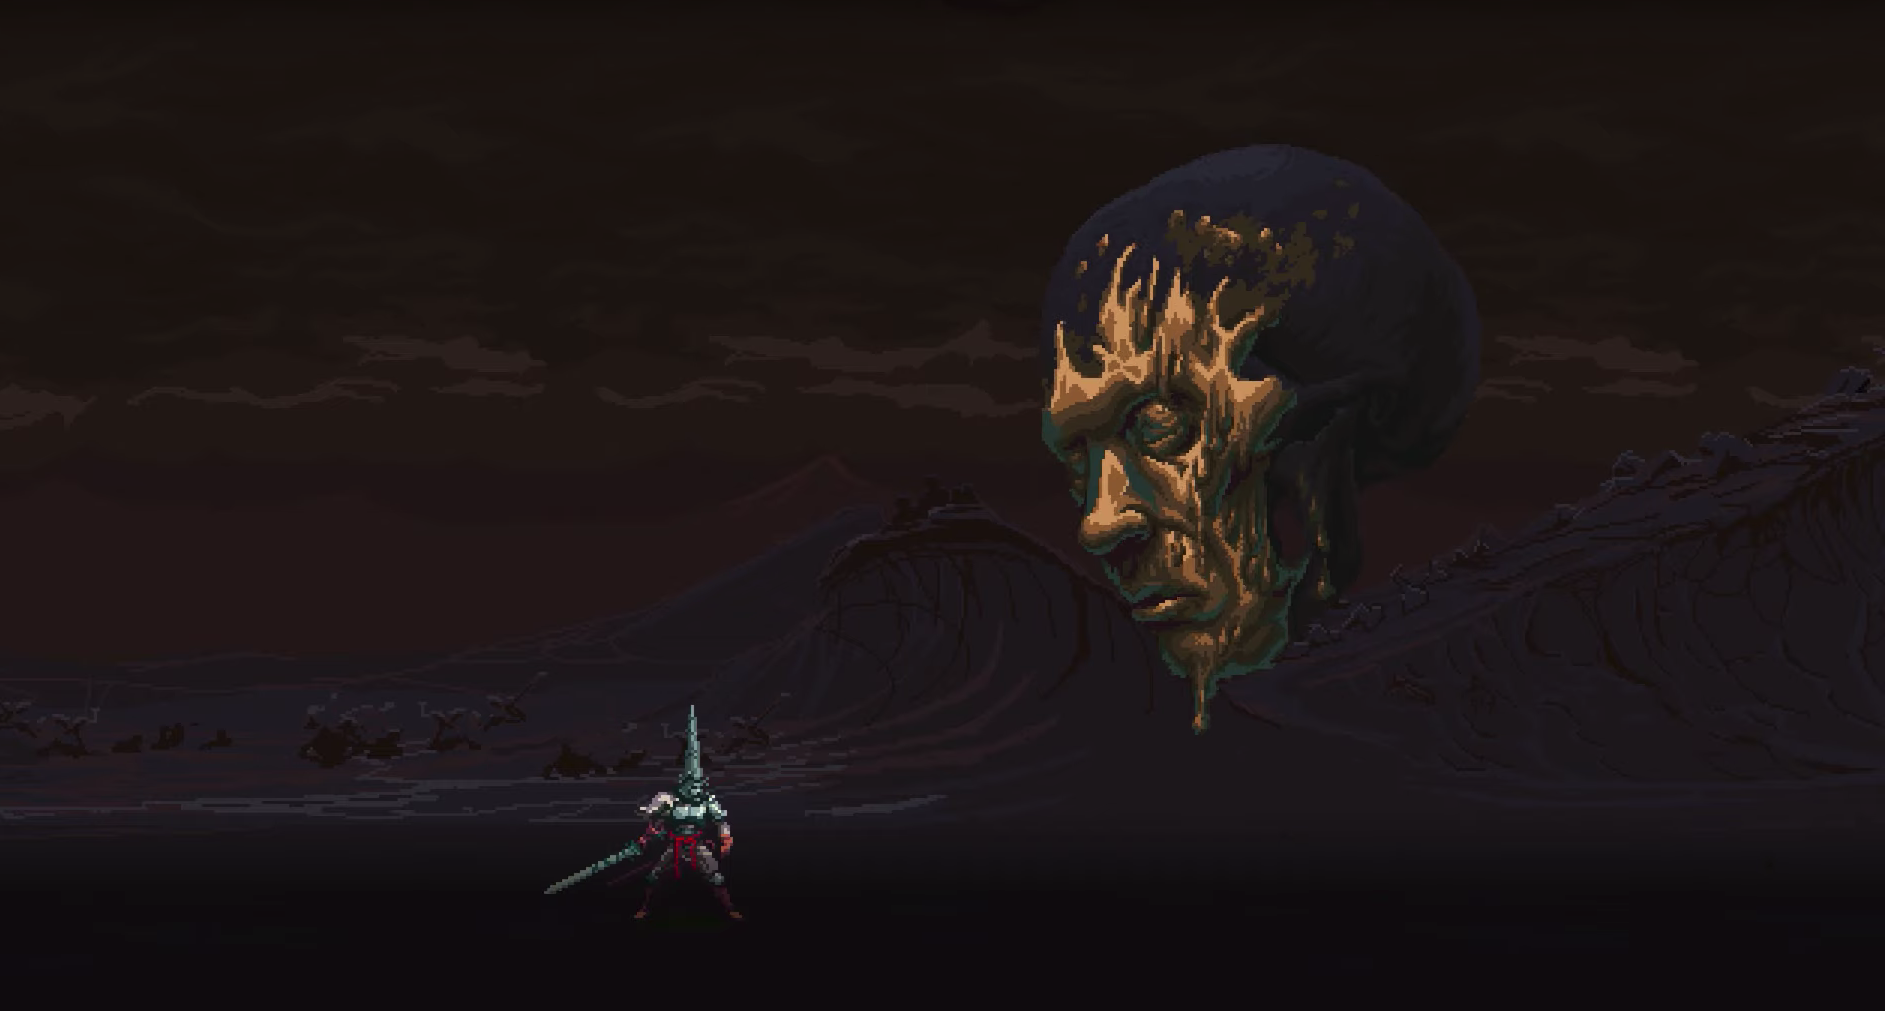 A boss fight in Blasphemous shows the main characters facing off against a giant floating head